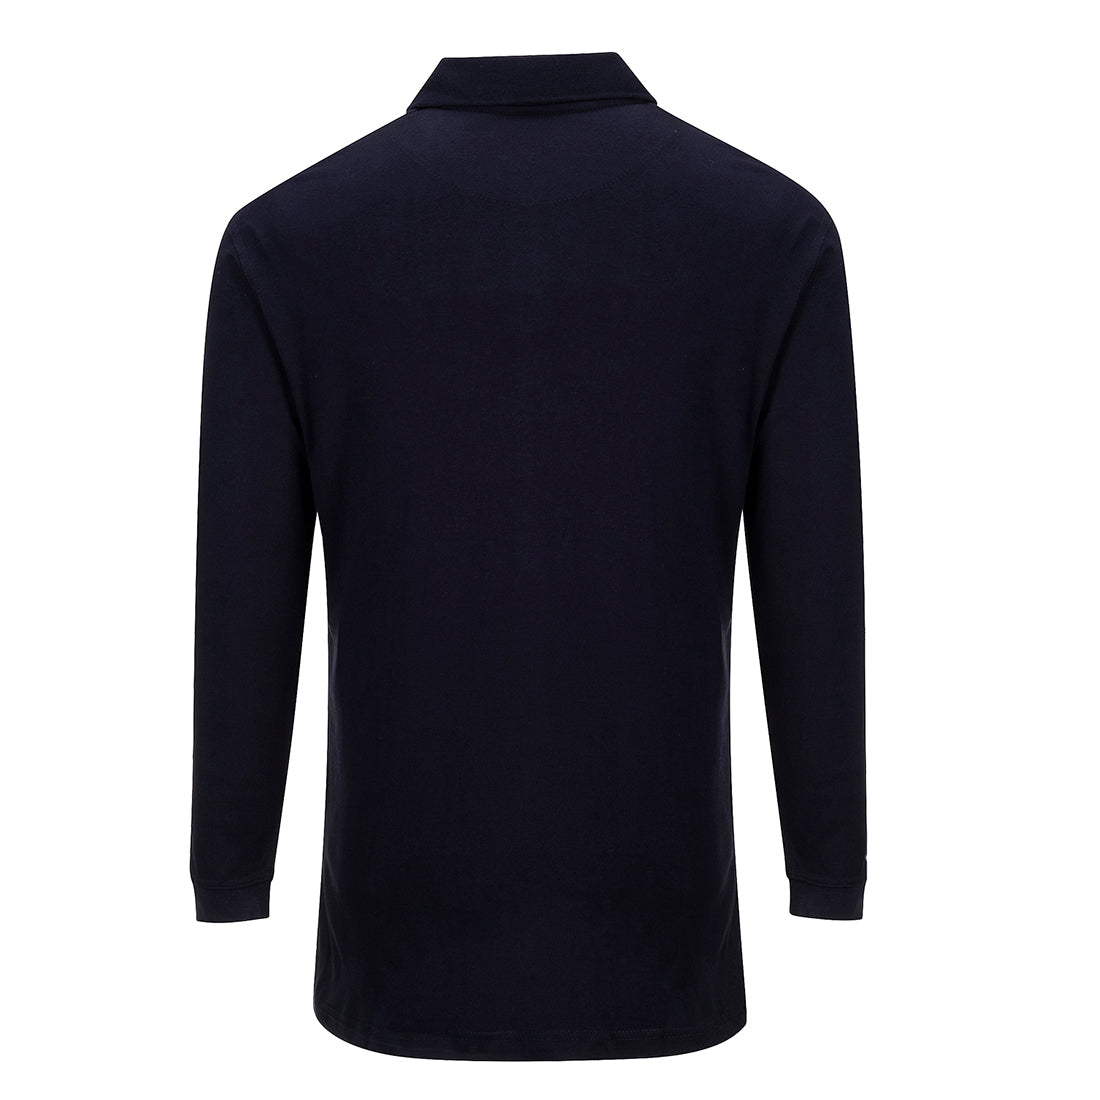 Flame Resistant Anti-Static Long Sleeve T-Shirt - FR11